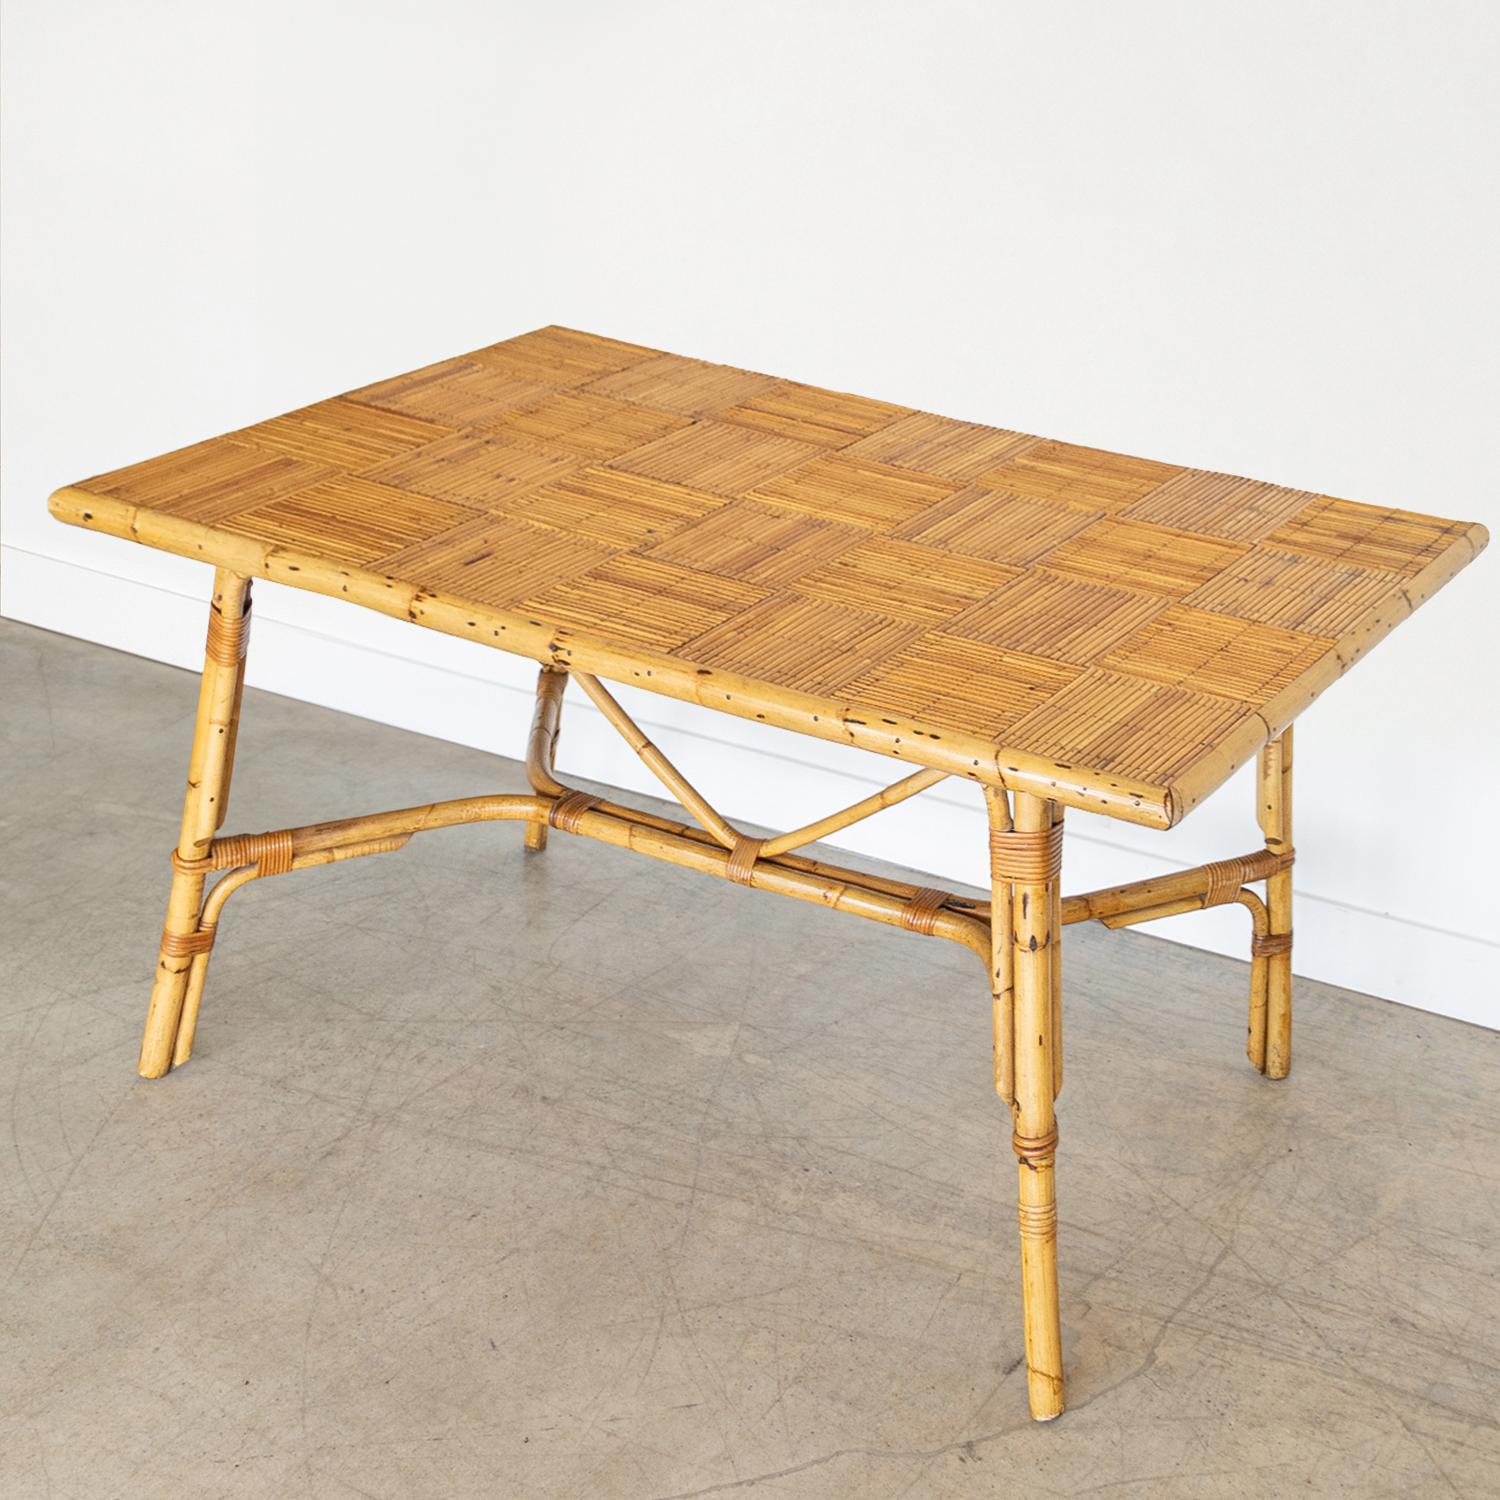 Incredible rattan dining table by Adrien Audoux and Frida Minet from France, 1960's. Rectangular rattan top with checked pattern surface and four bamboo legs with wrapped rattan detailing. All original rattan finish shows age, patina, and wear.